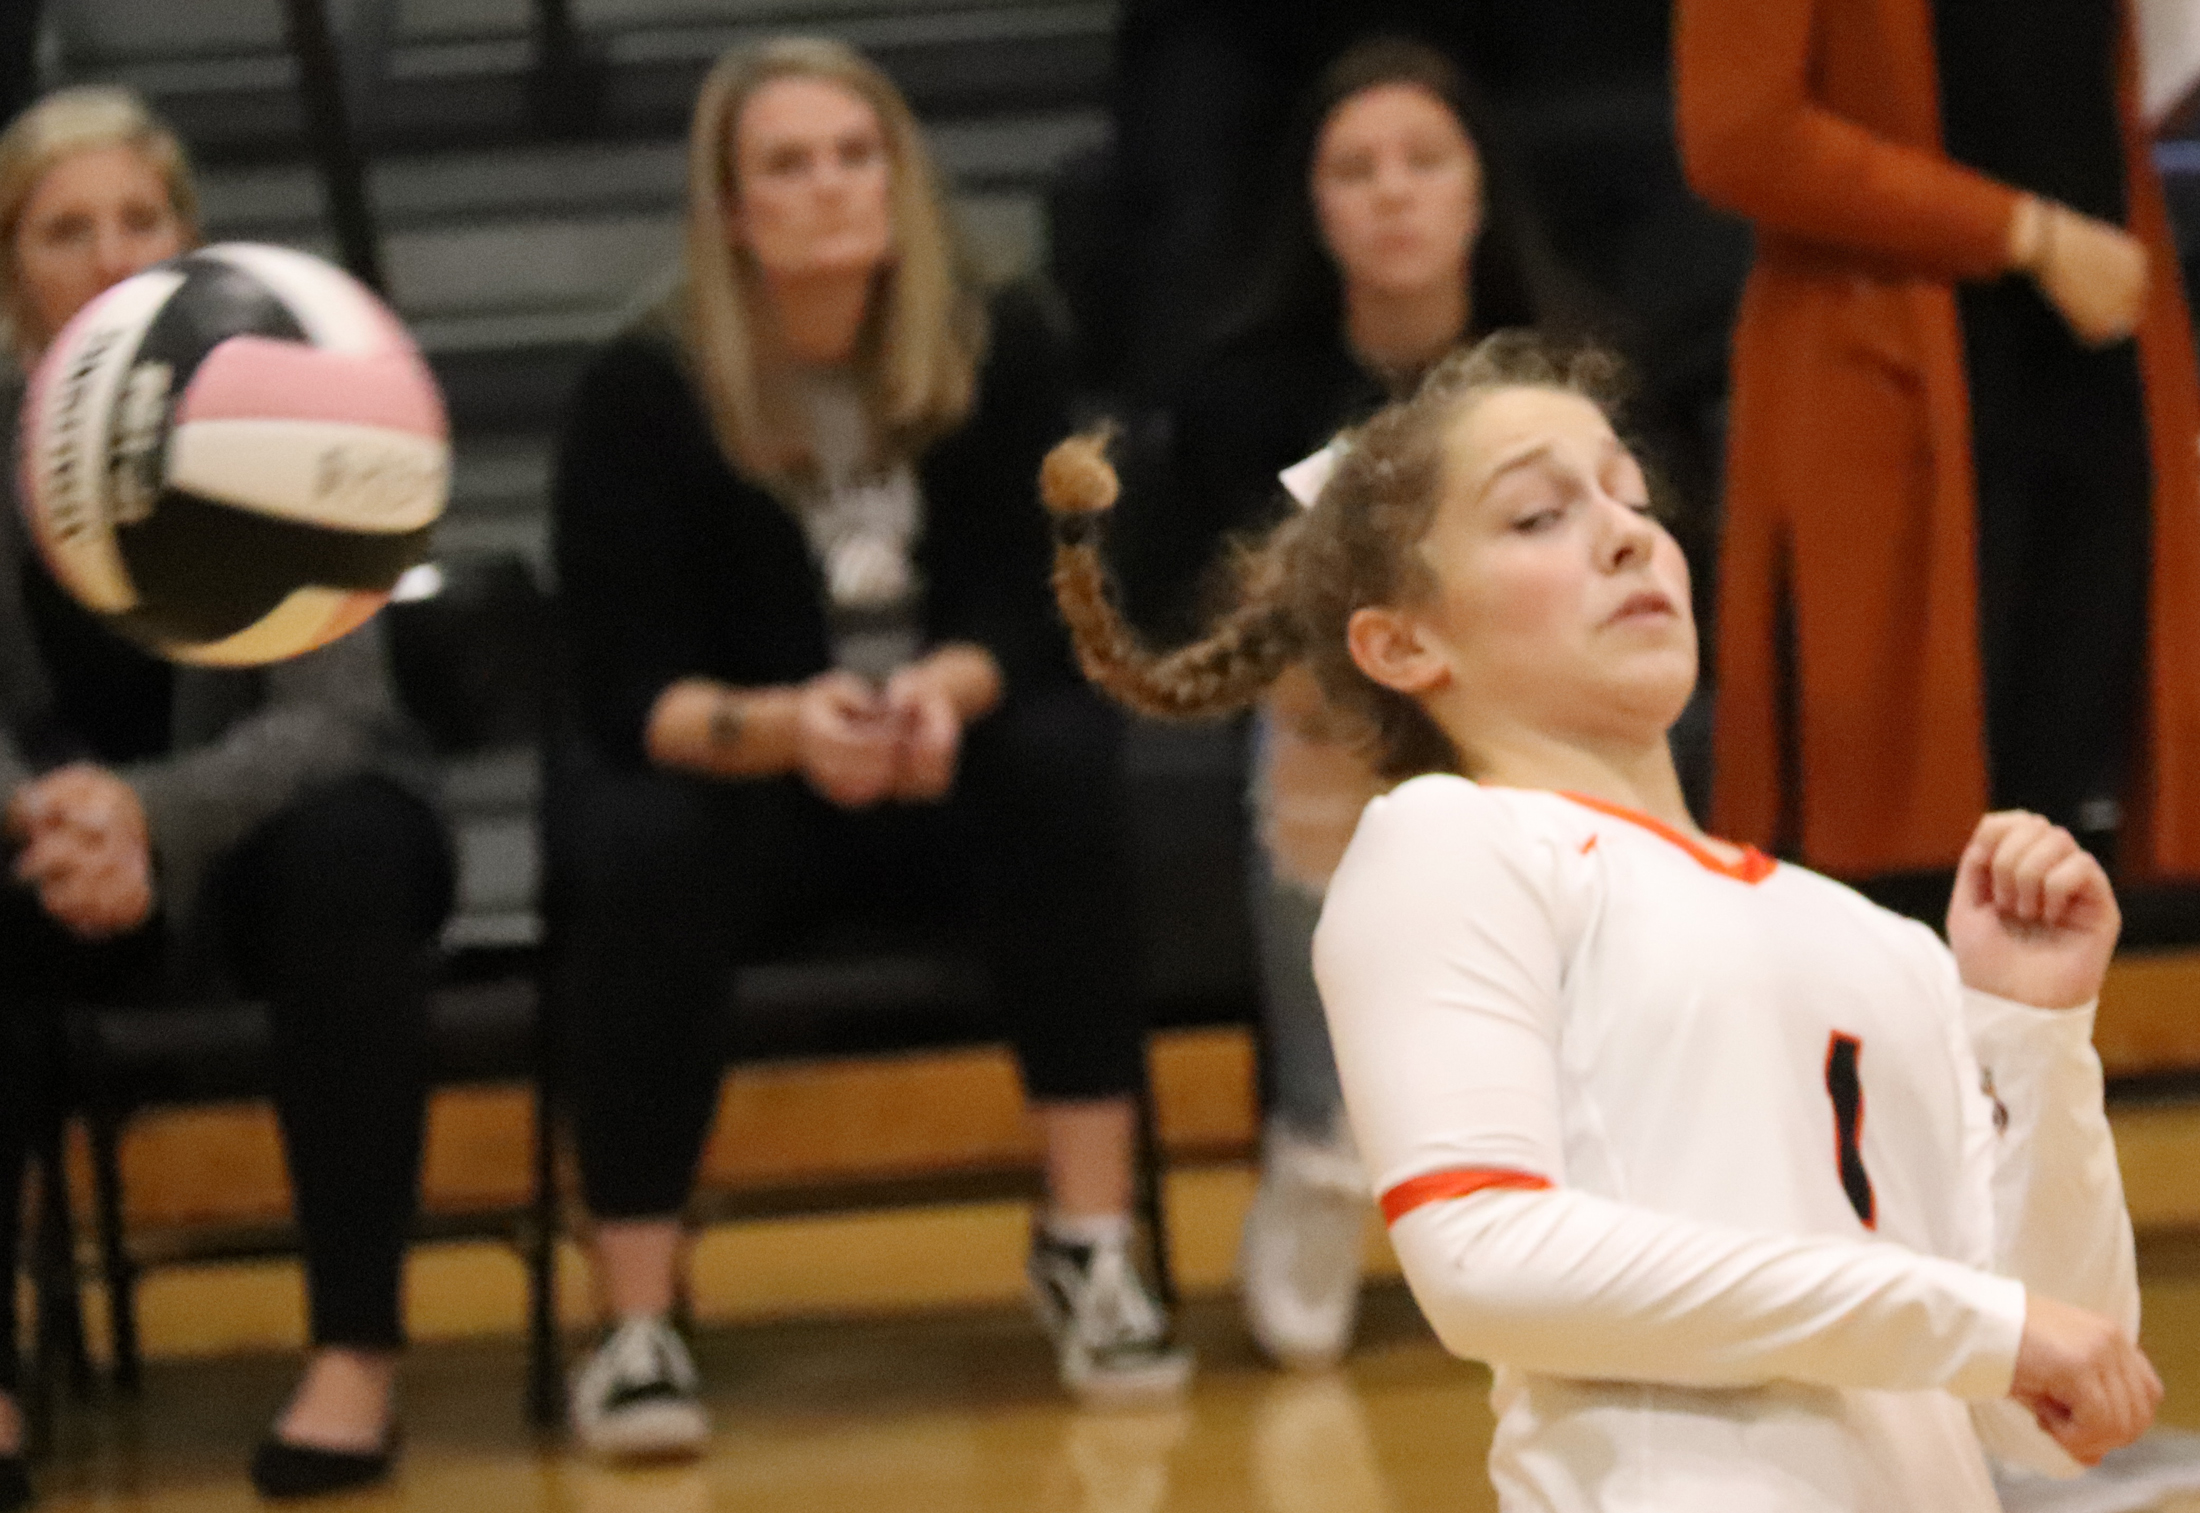 Comets slay Lions, fall to Mohawks in VB tri-meet